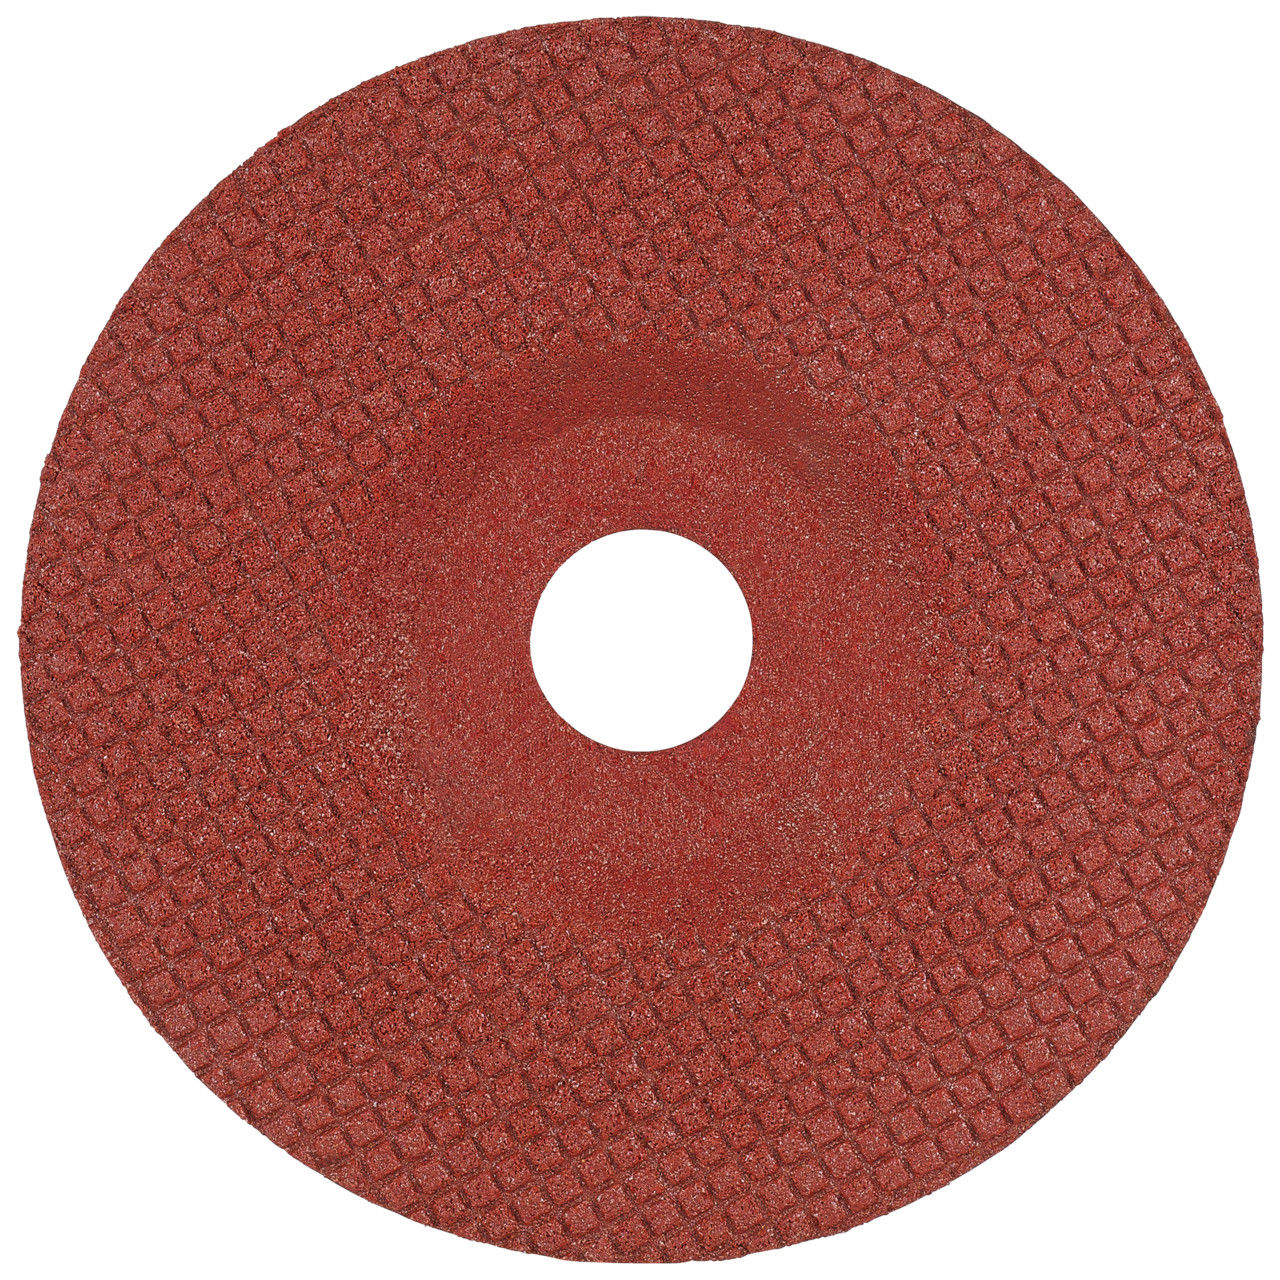 Tyrolit Grinding disc DxH 125x22.23 TOUCH for stainless steel and non-ferrous metals, shape: 29T - offset version, Art. 236319